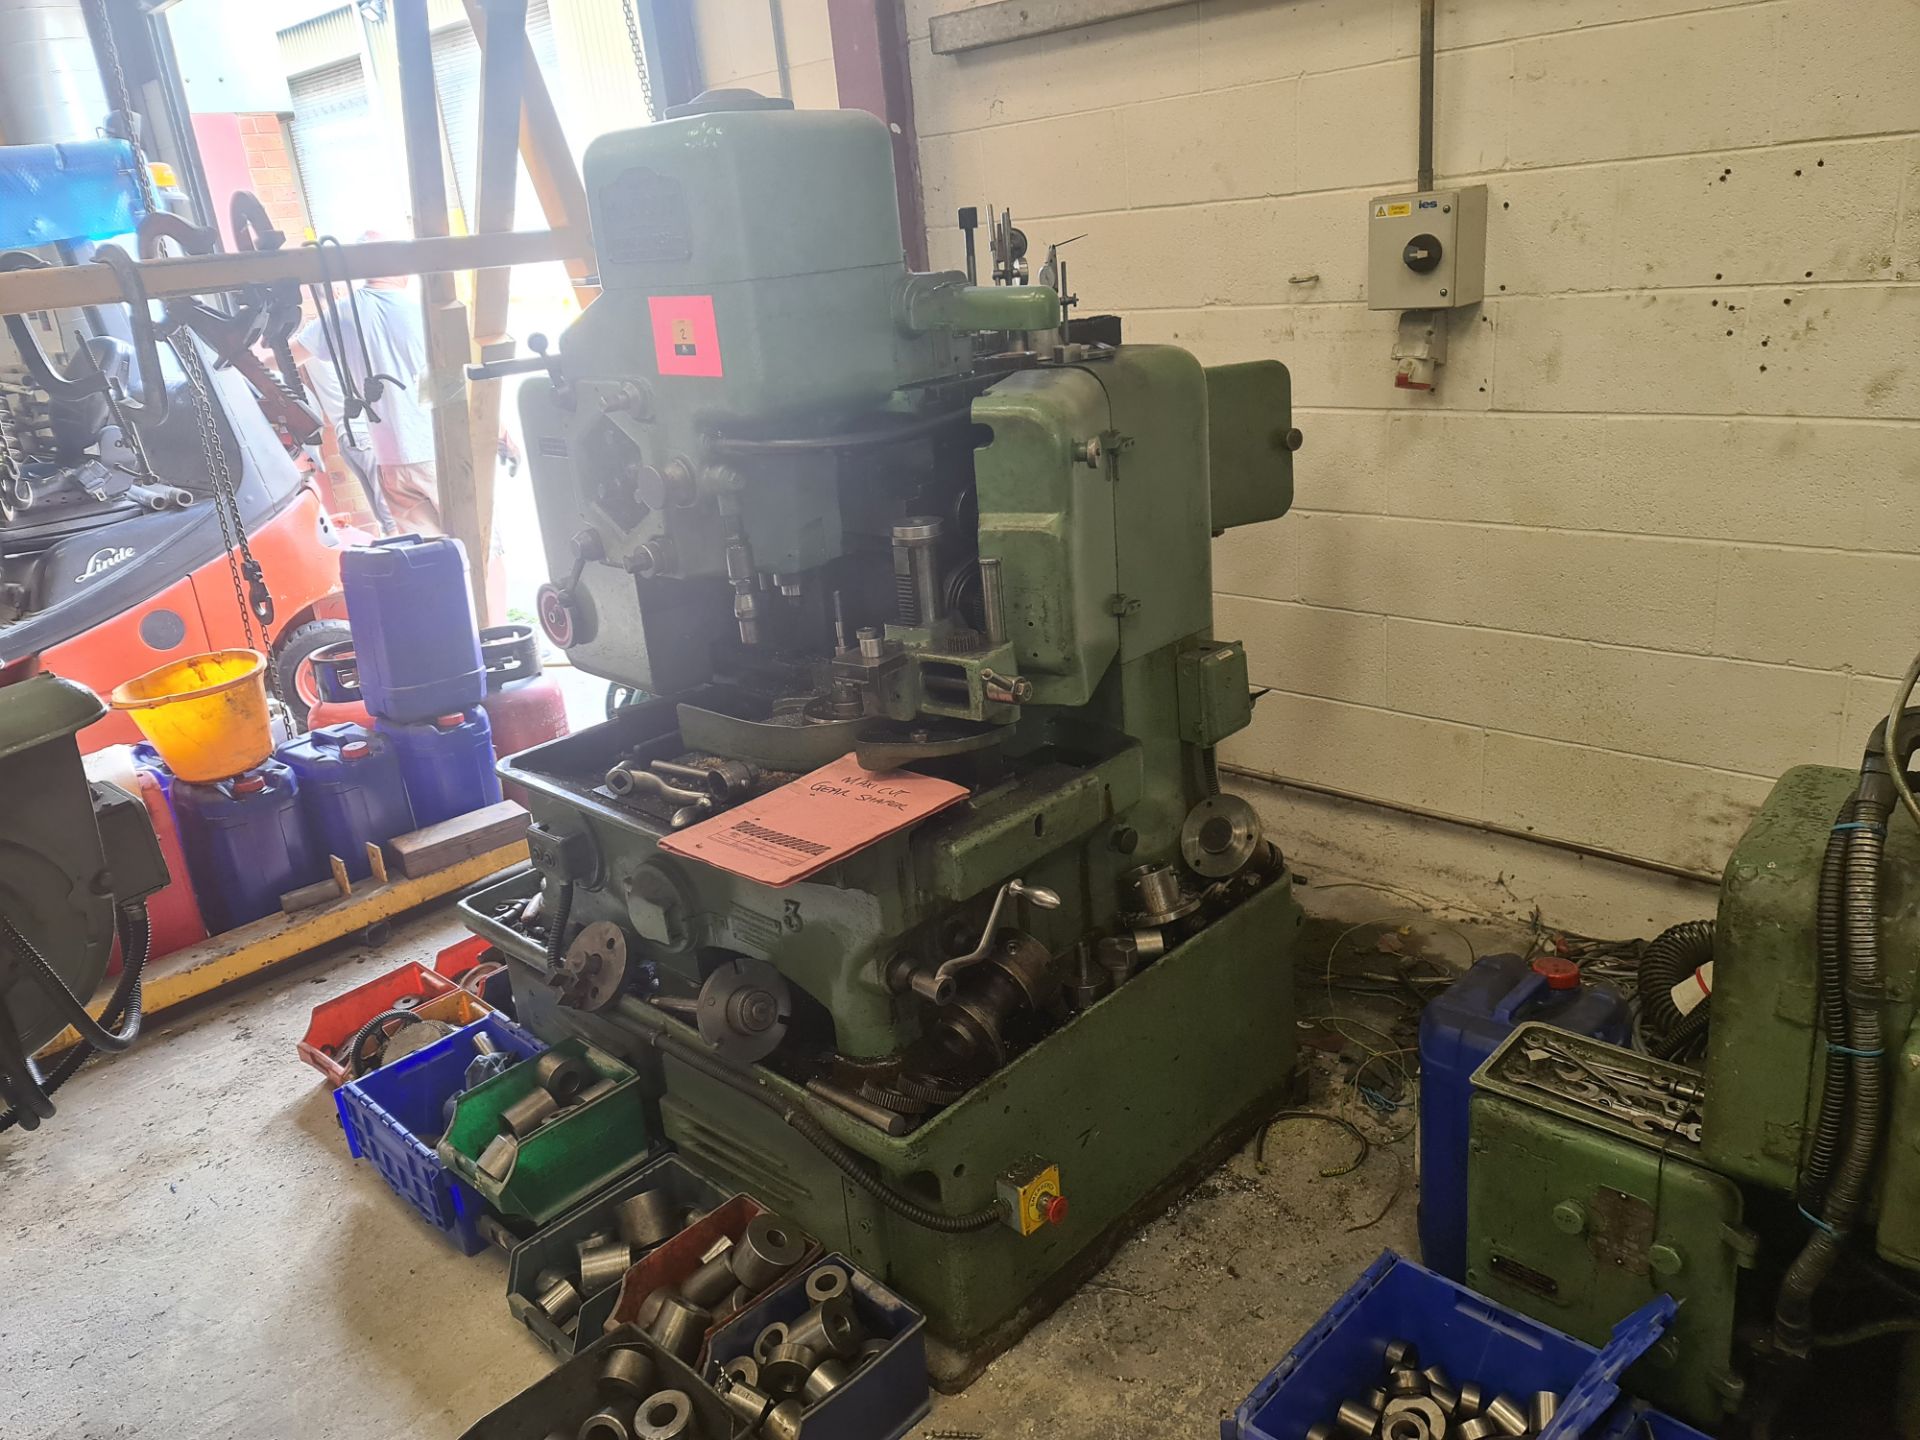 Maxicut number 2A gear shaping machine including the crates & contents immediately surrounding the m